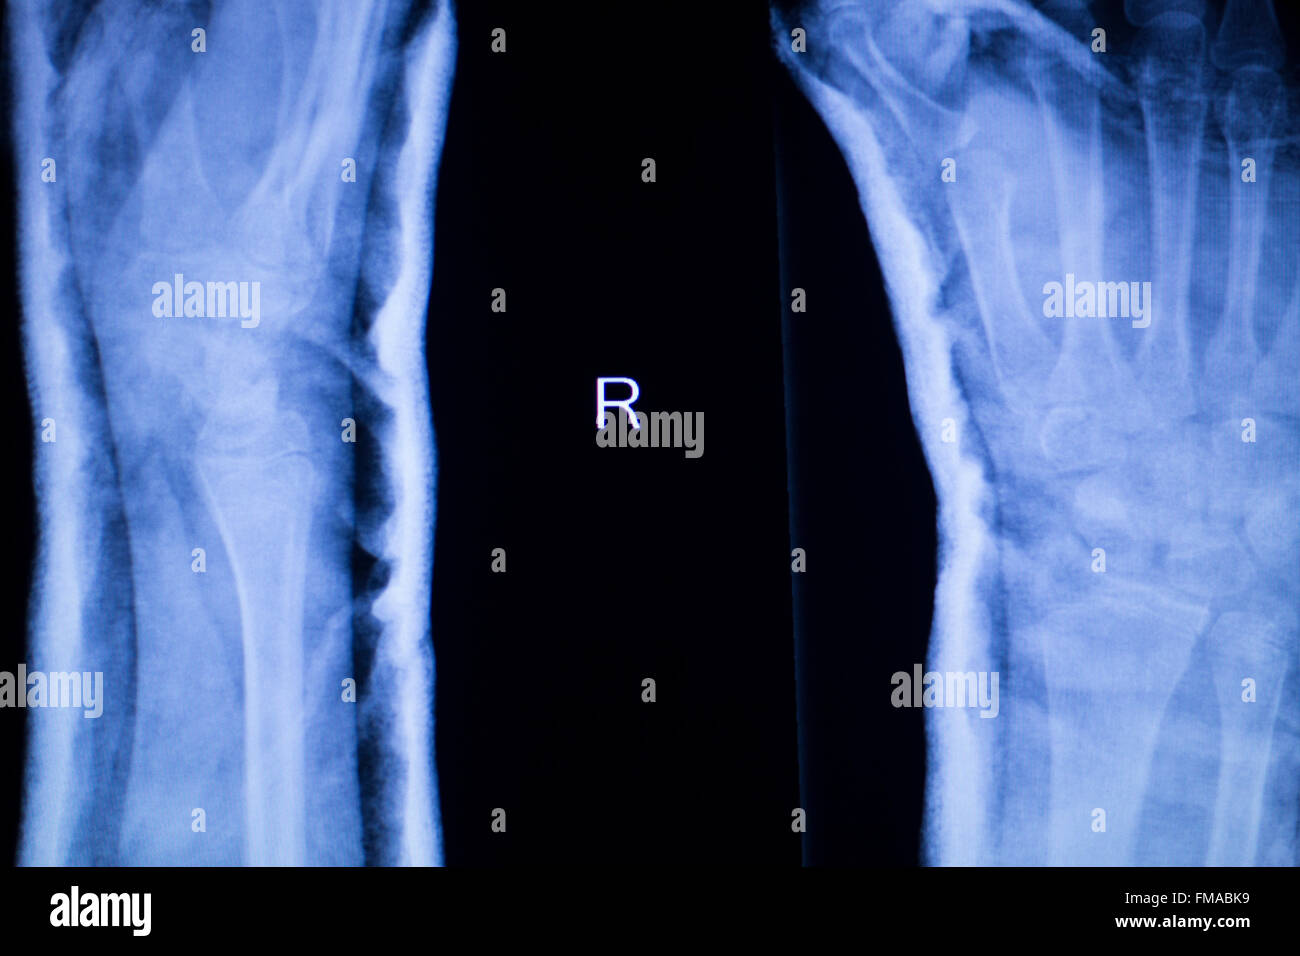 Forearm Arm And Elbow Injury Xray Scan Test Reults To Diagnose Pain